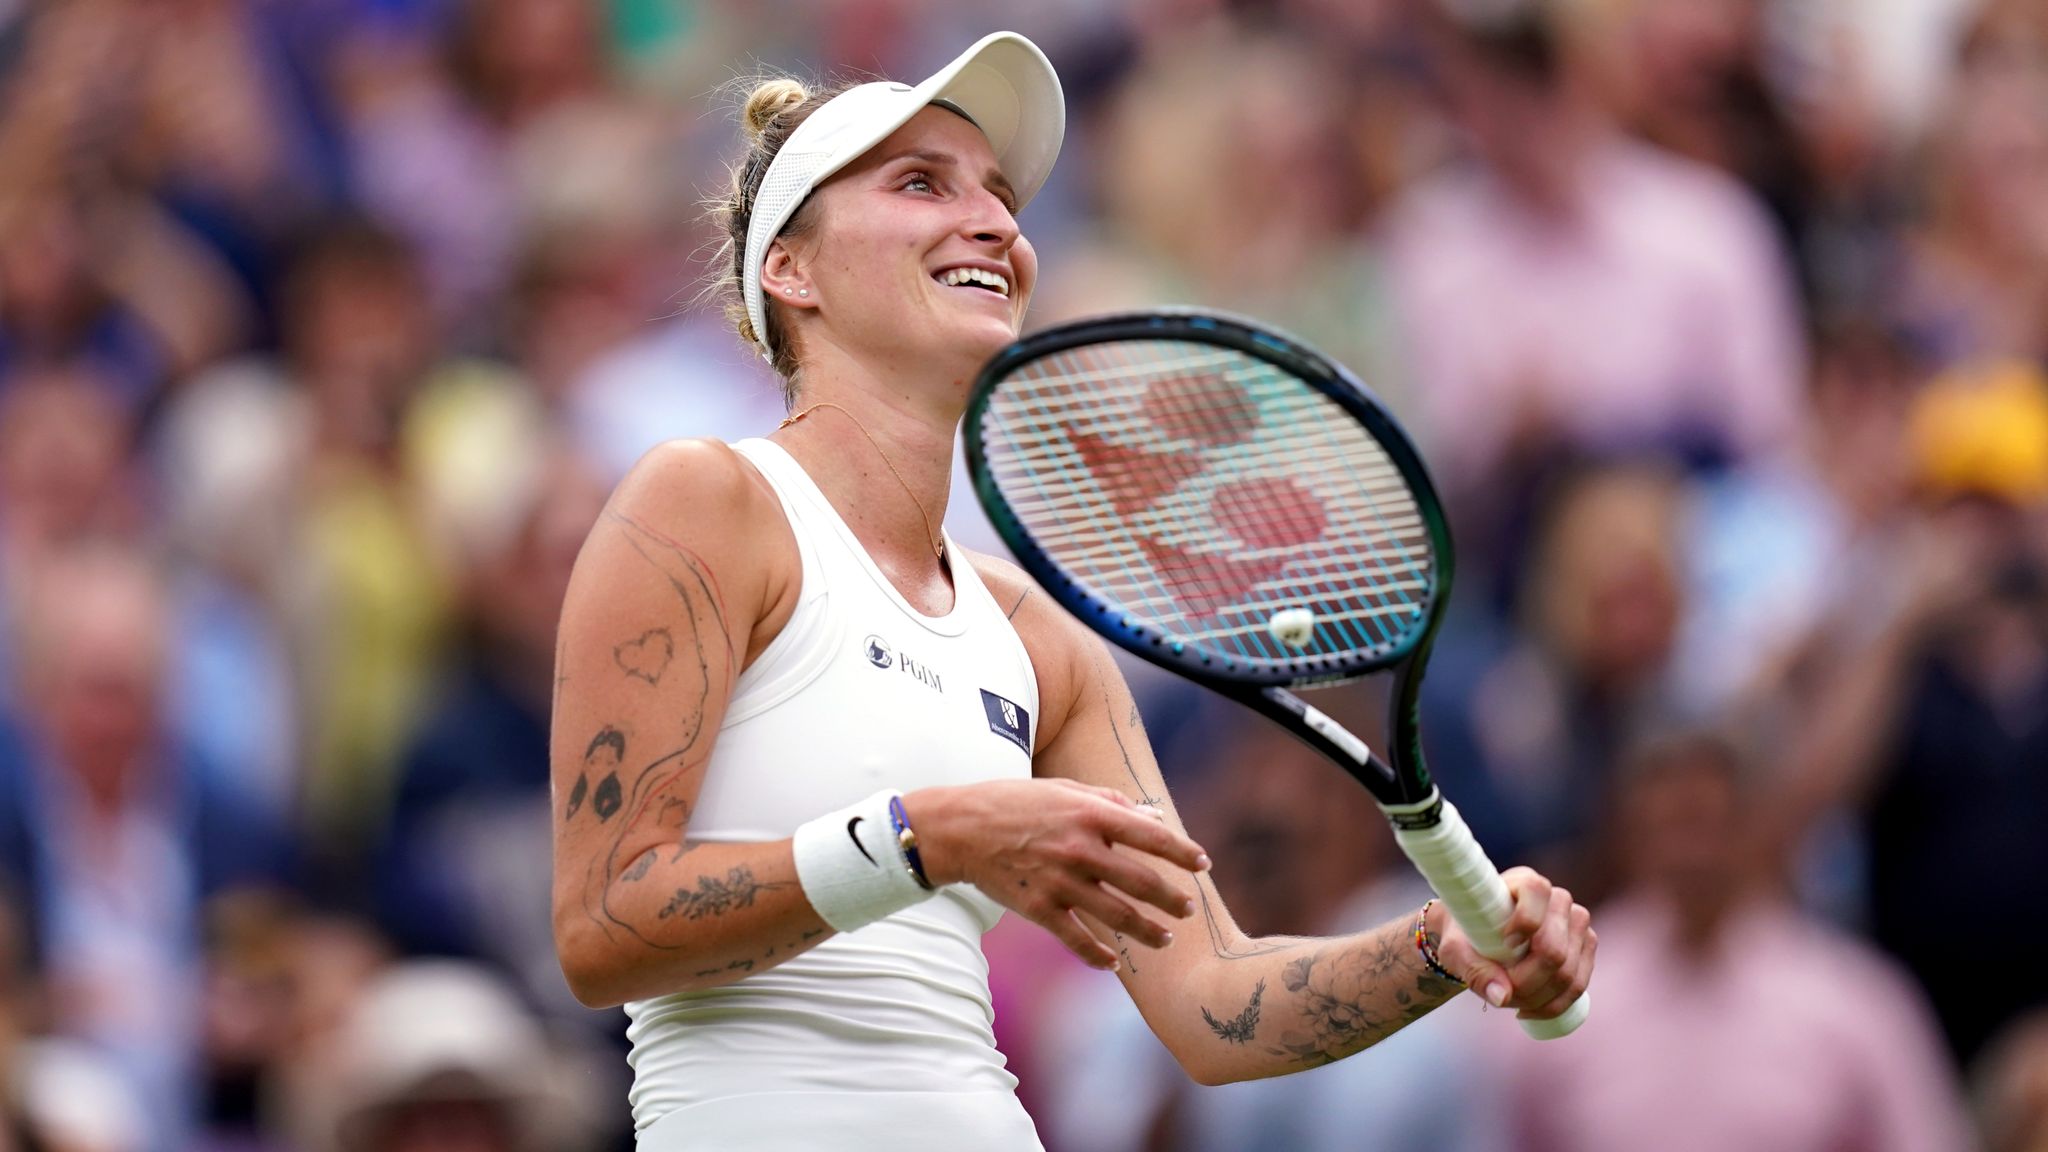 Wimbledon Ons Jabeur refusing to give up on Grand Slam dream after